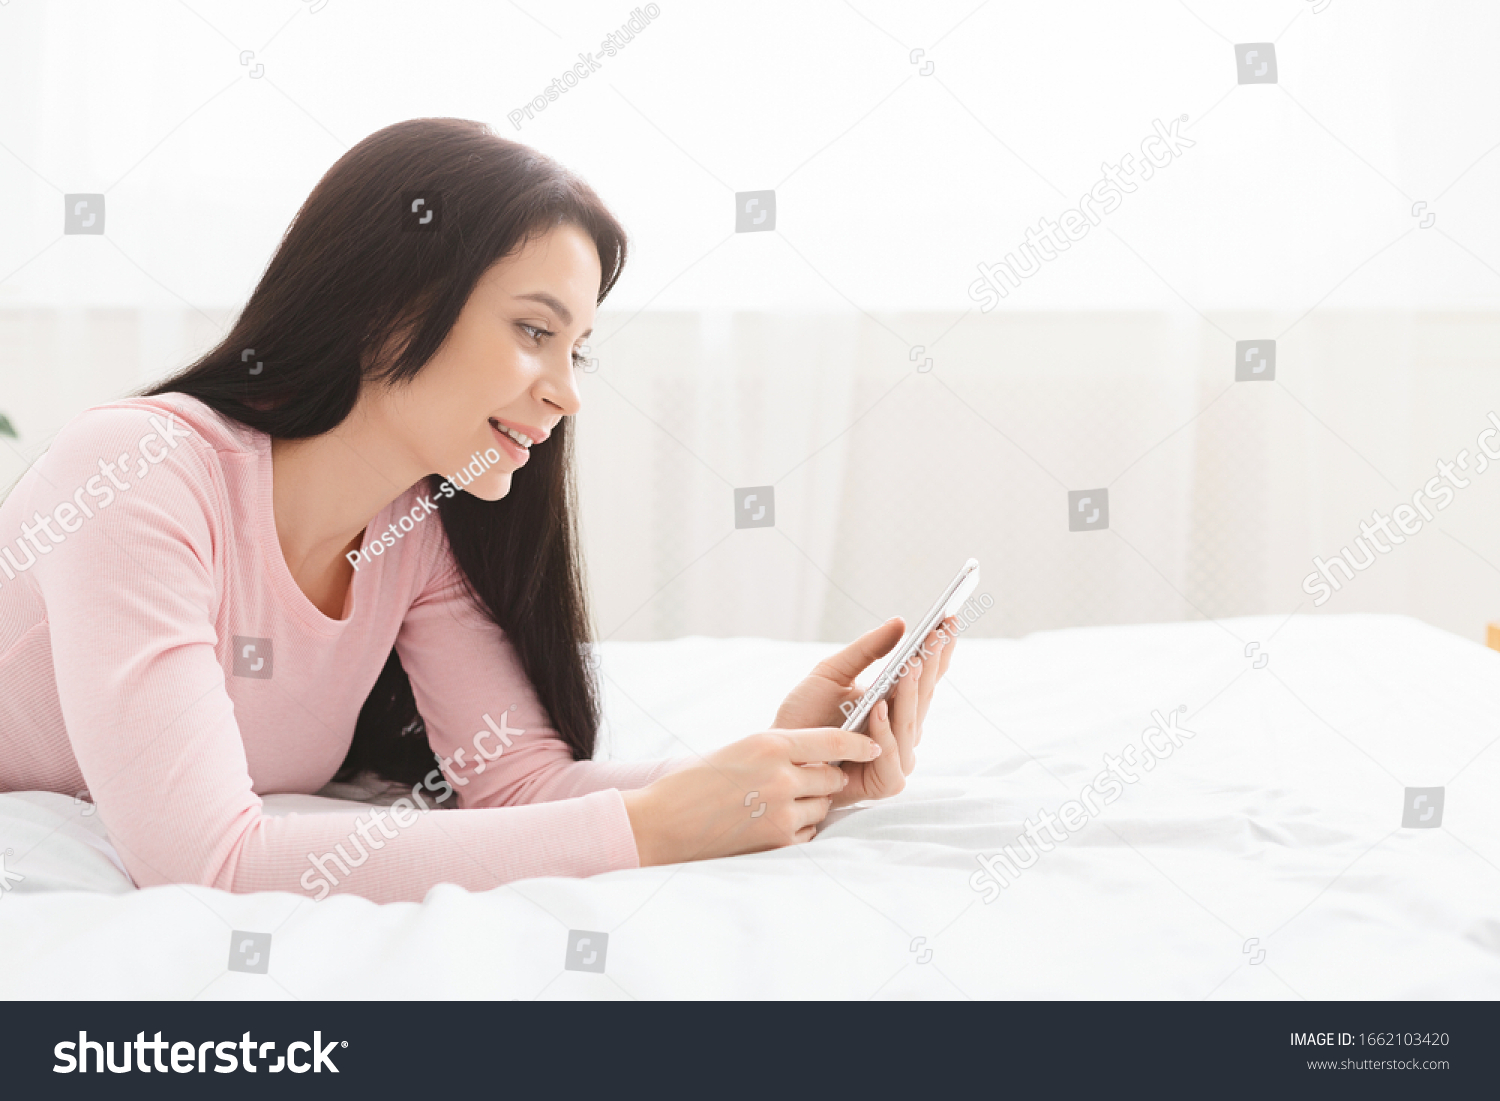 Internet time. Millennial woman browsing on cellphone, lying on bed, side view, empty space #1662103420